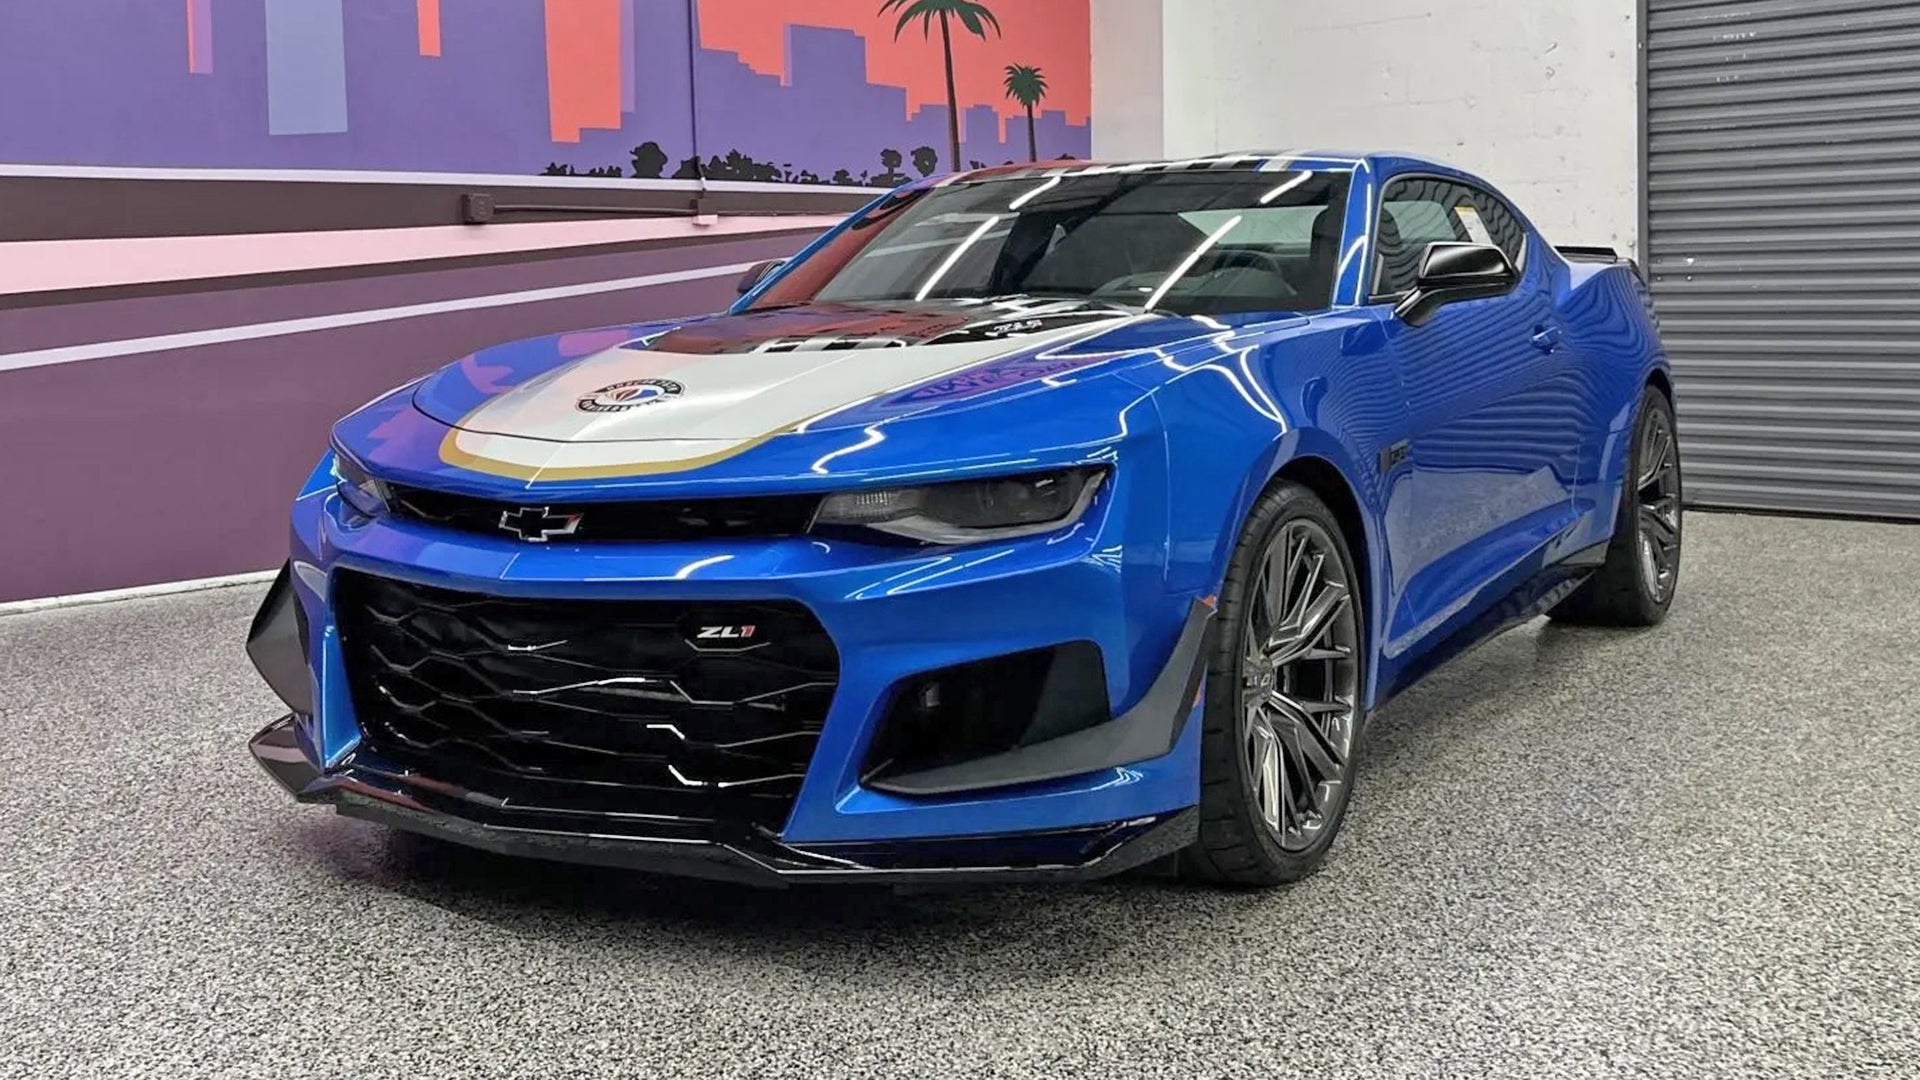 Flippers is struggling to sell the 56 Chevy Camaro Garage Edition